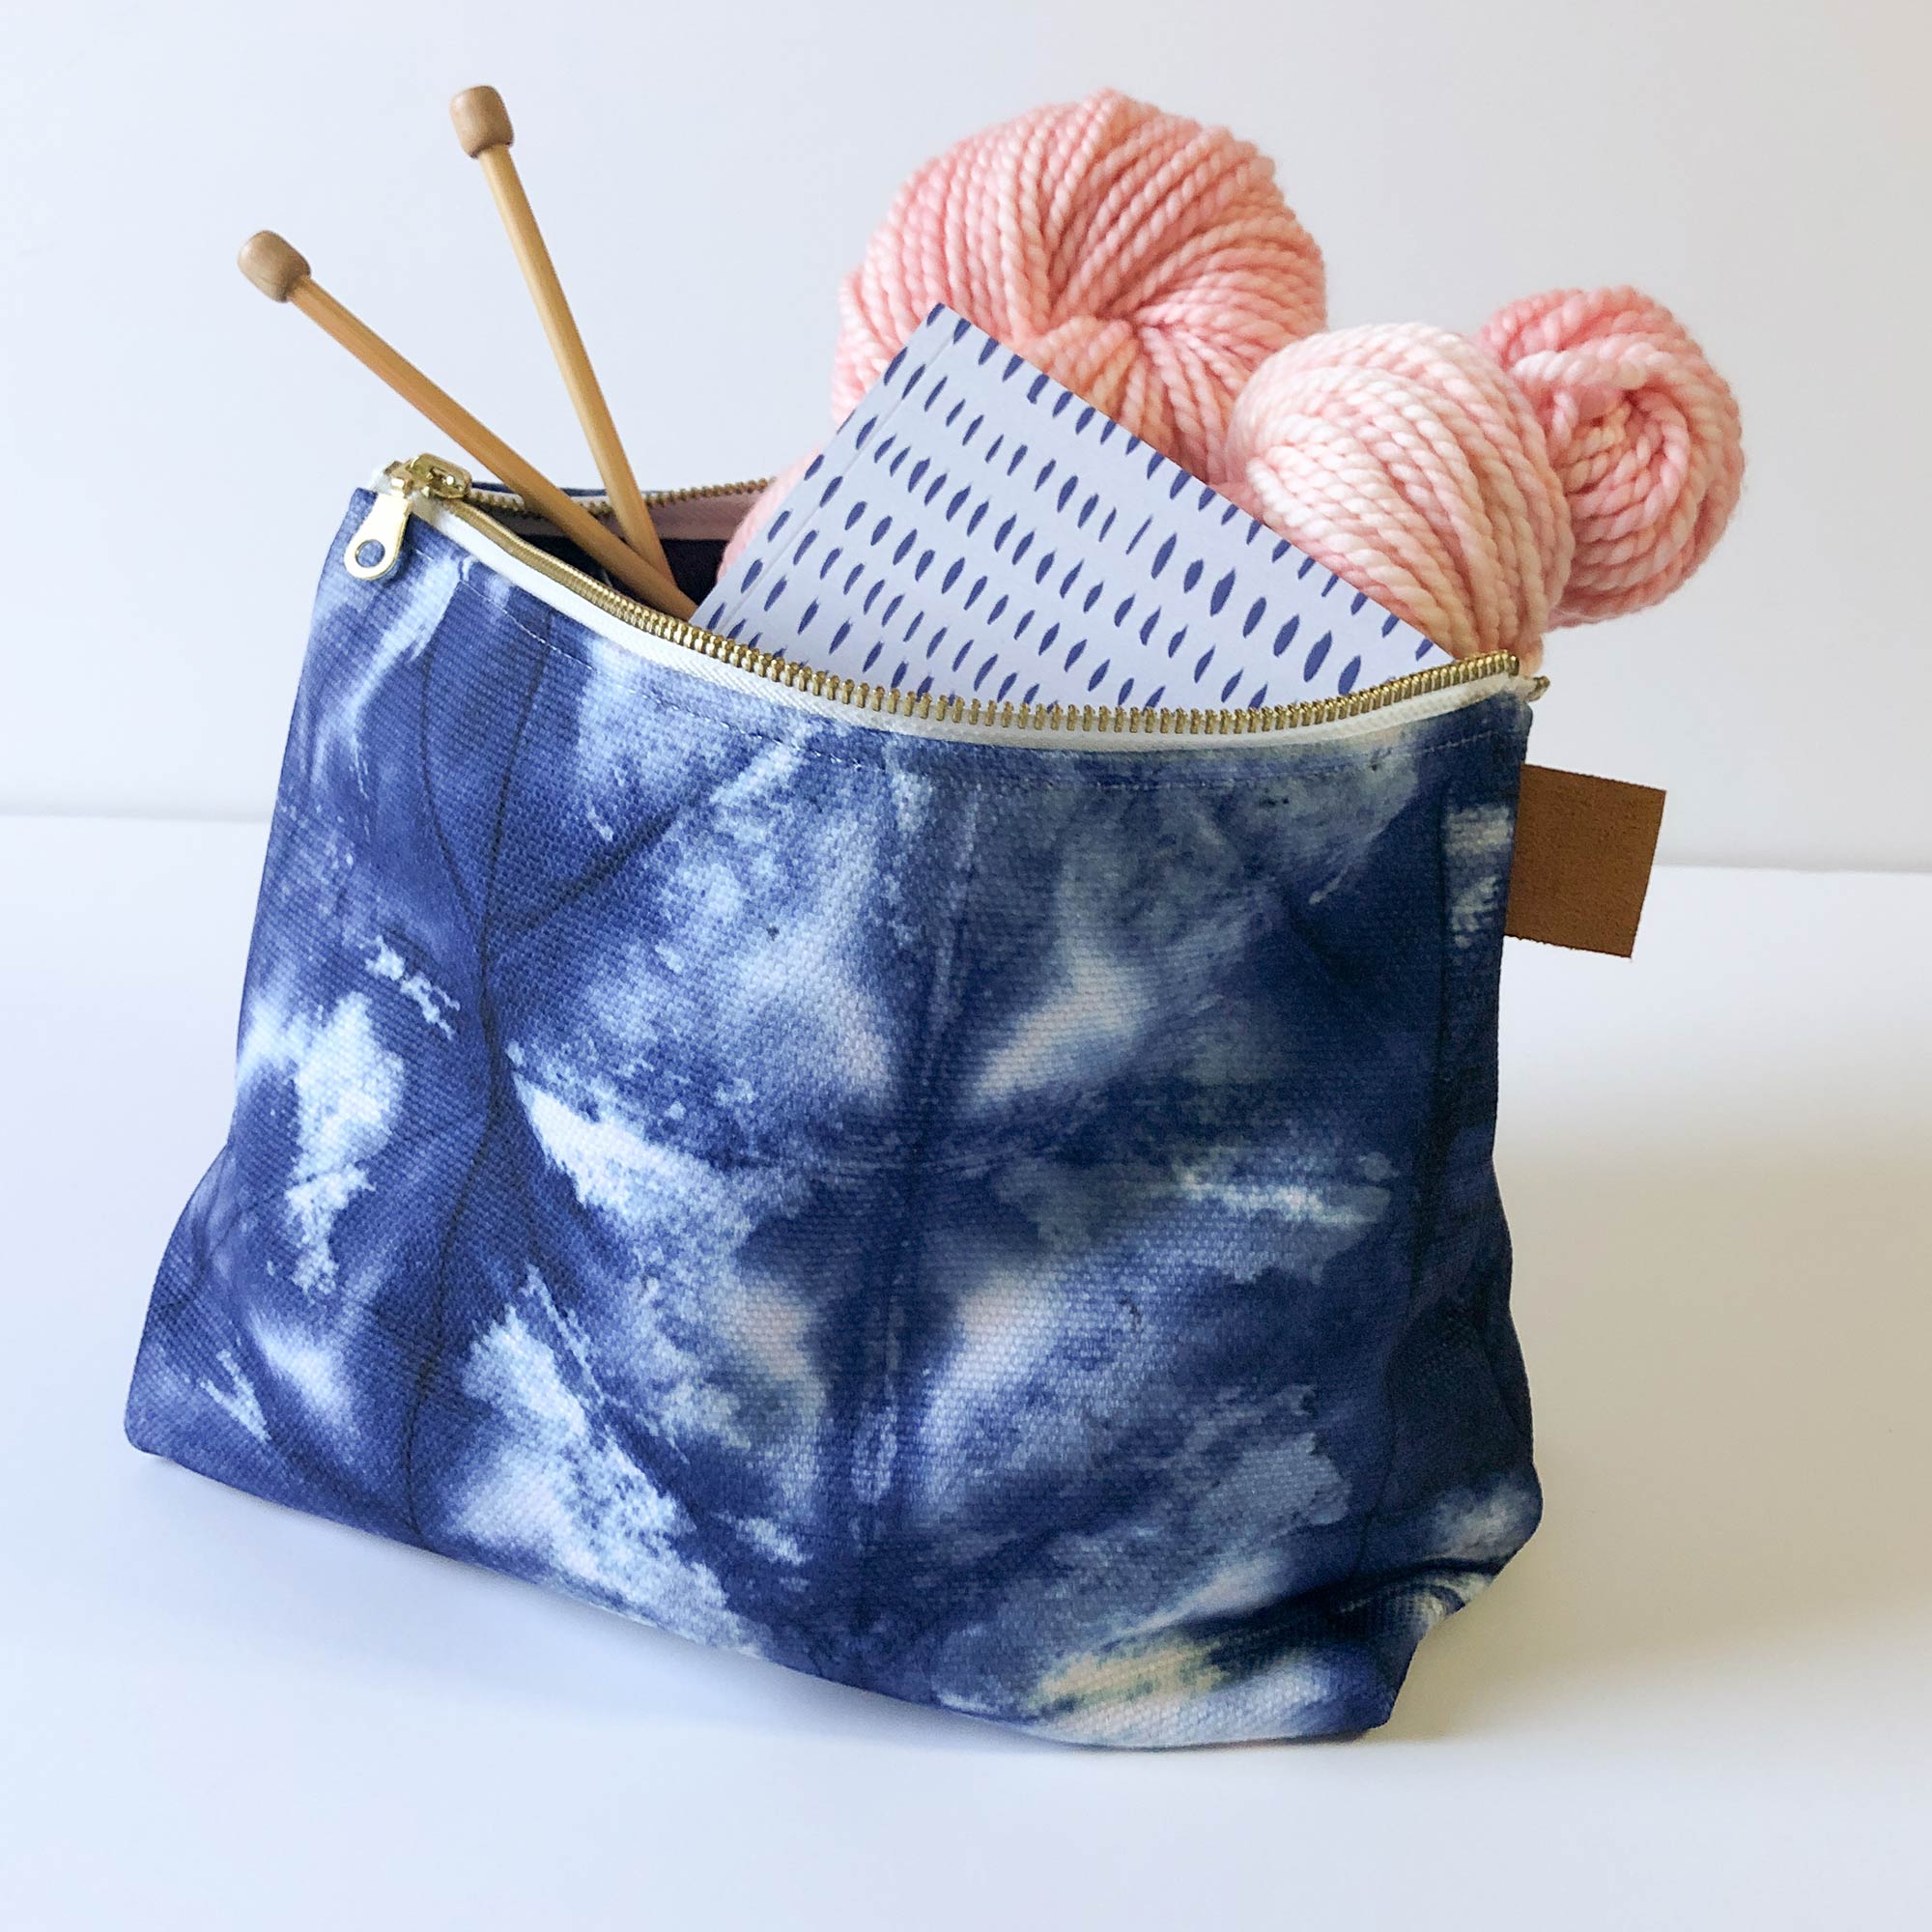 shibori indigo blue zipper pouch project bag for knitting and crochet -- with brass zipper and vegan brown leather side tab